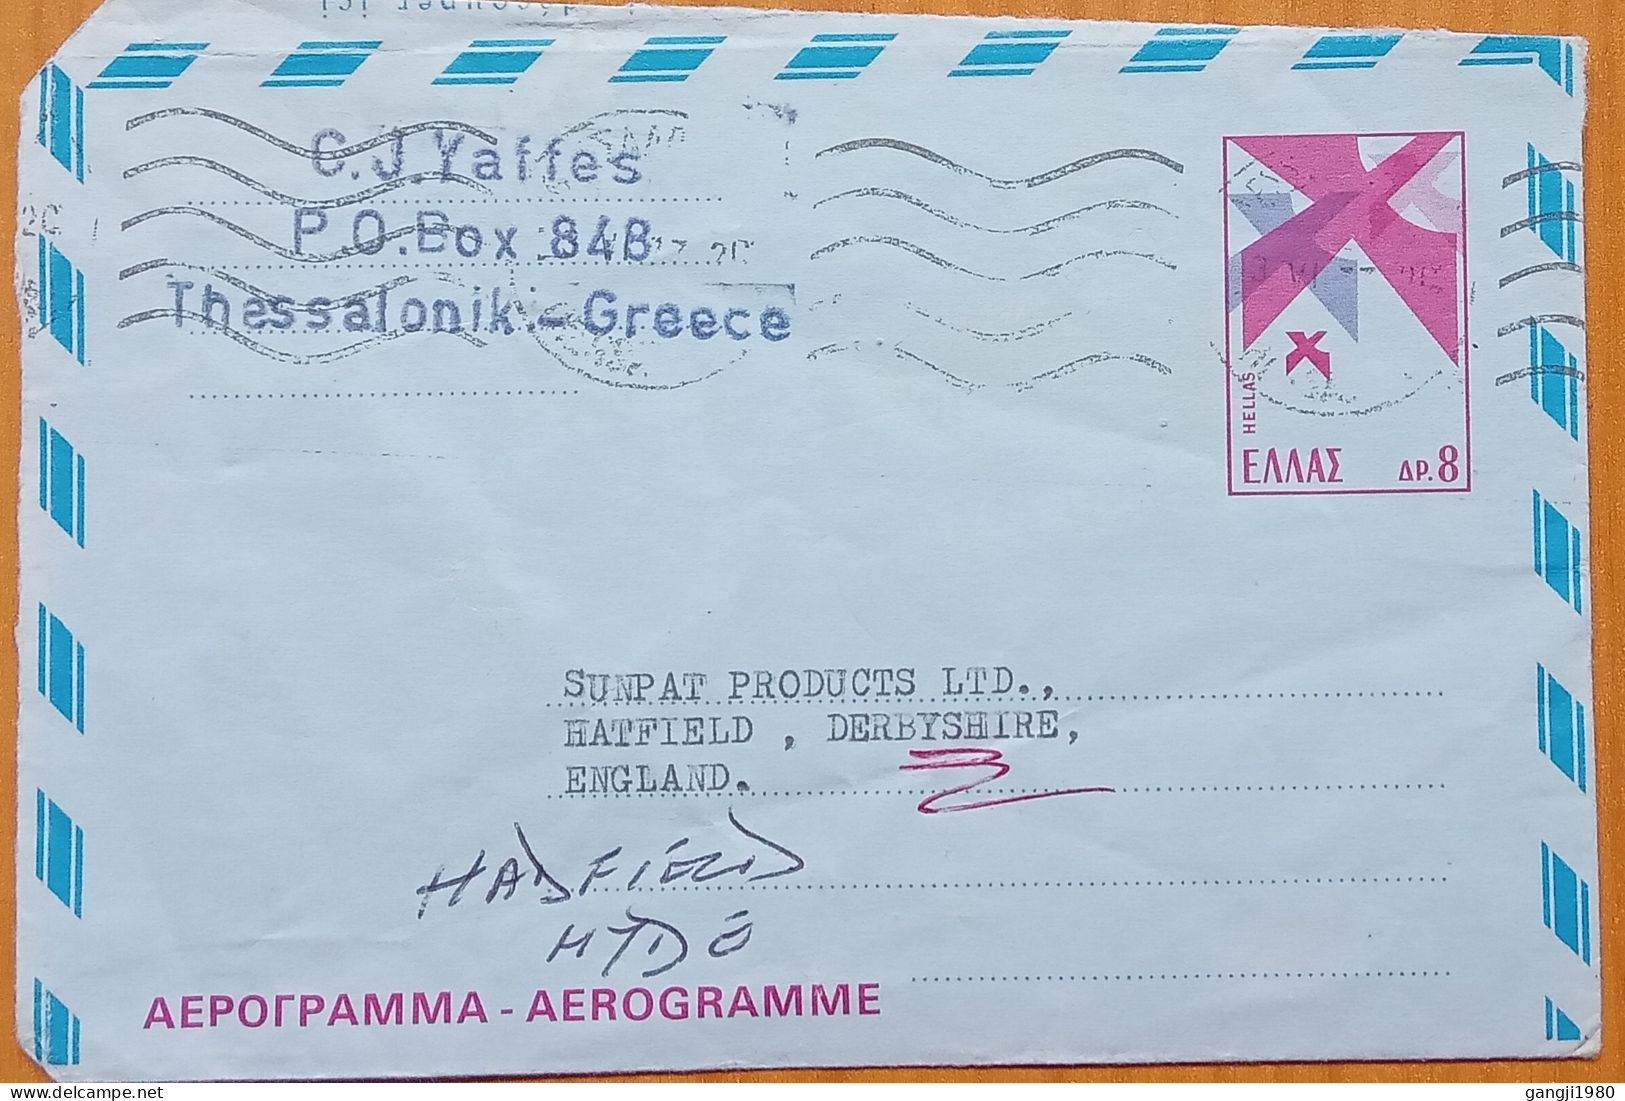 GREECE 1977, STATIONERY, AEROGRAMME, VIEW THESSALONIK CITY, 8 DRACHMA VALUE, BIRD SYMBOL, USED TO ENGLAND, - Lettres & Documents